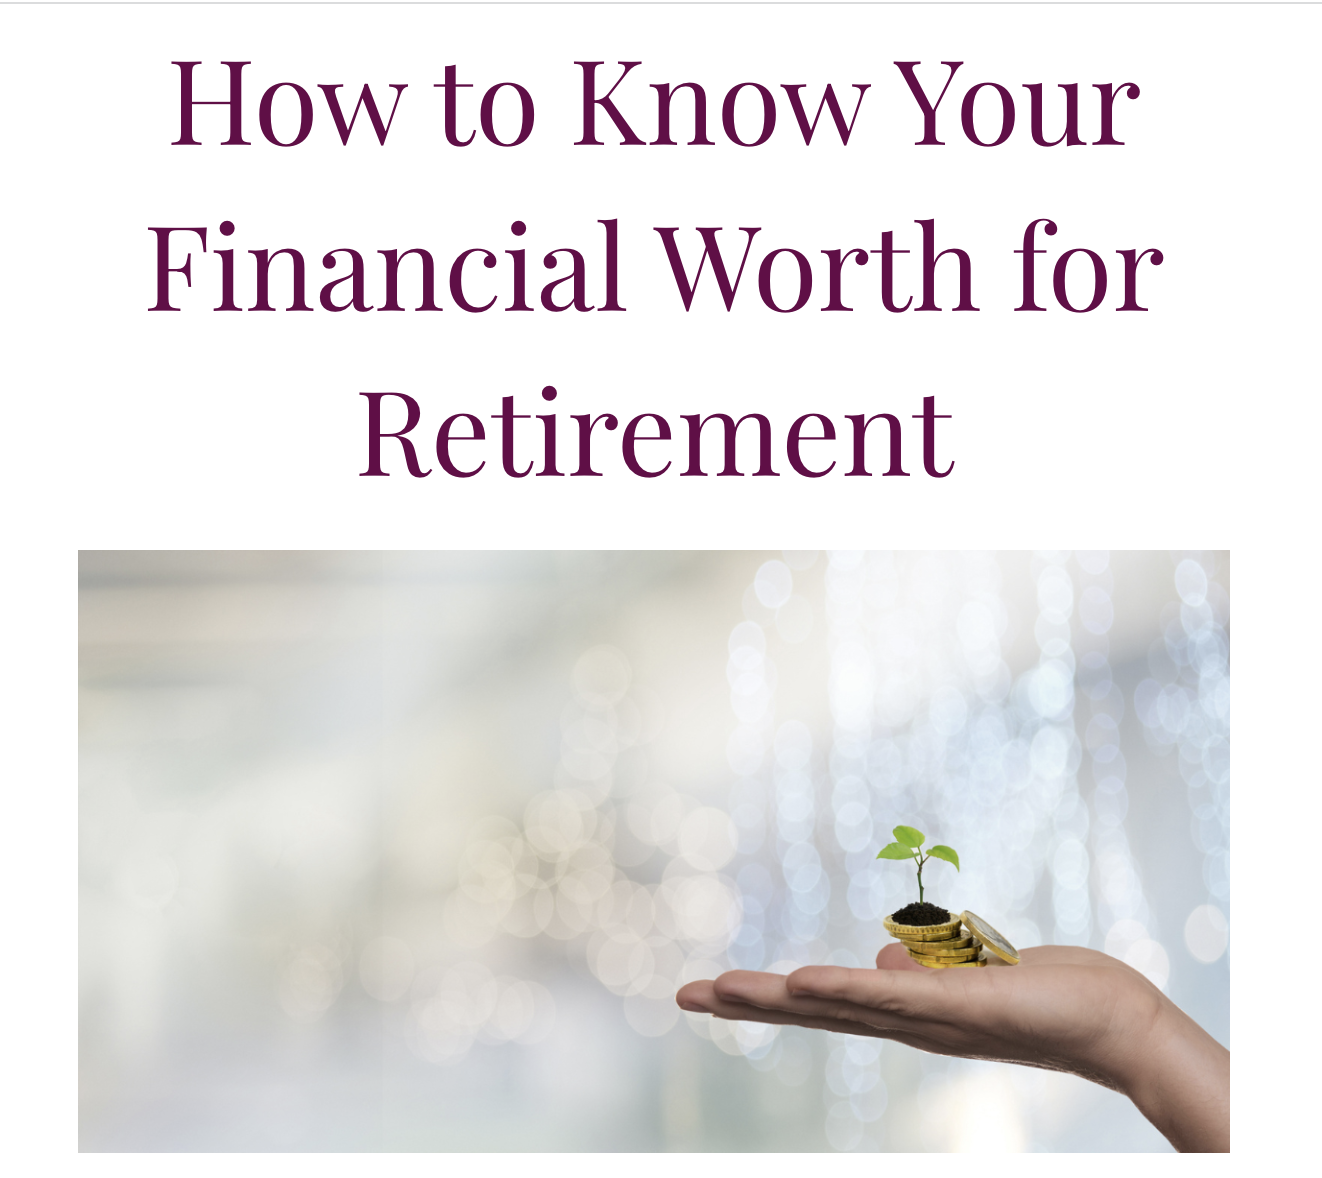 *How to Know Your Financial Worth for Retirement